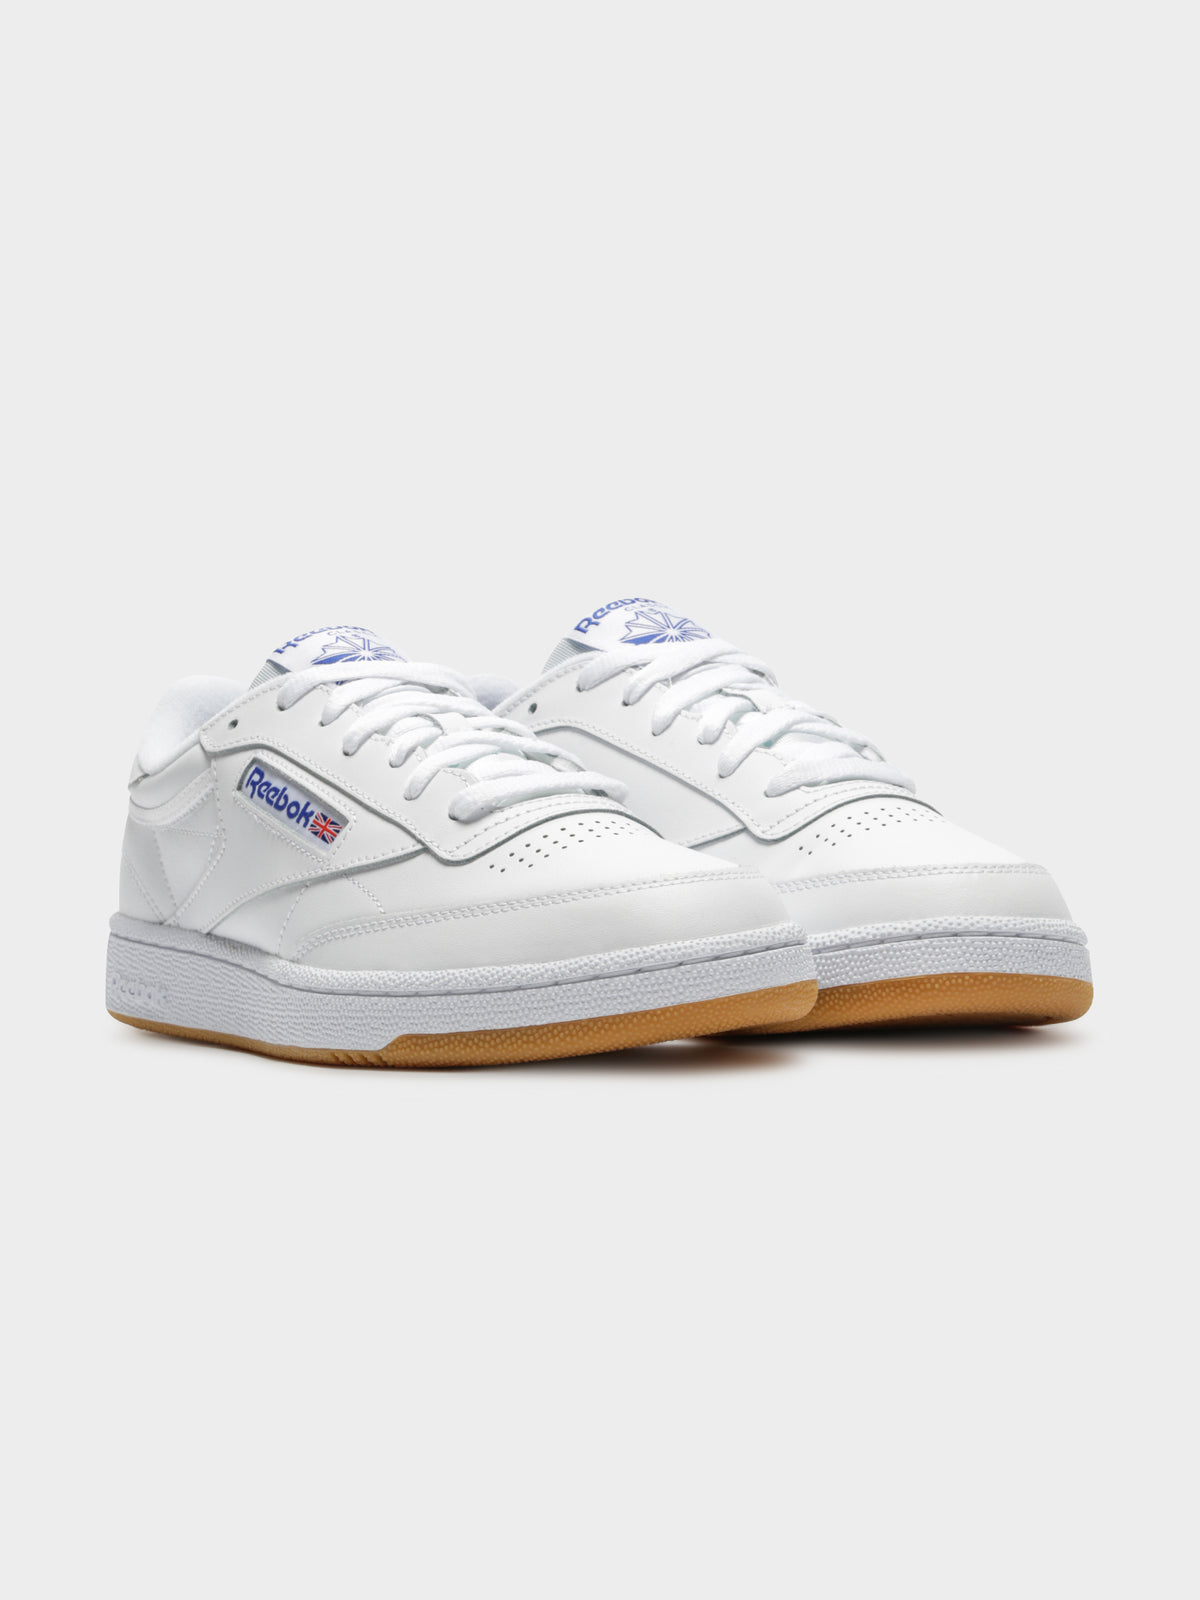 Unisex Club C 85 Sneakers in White &amp; Blue